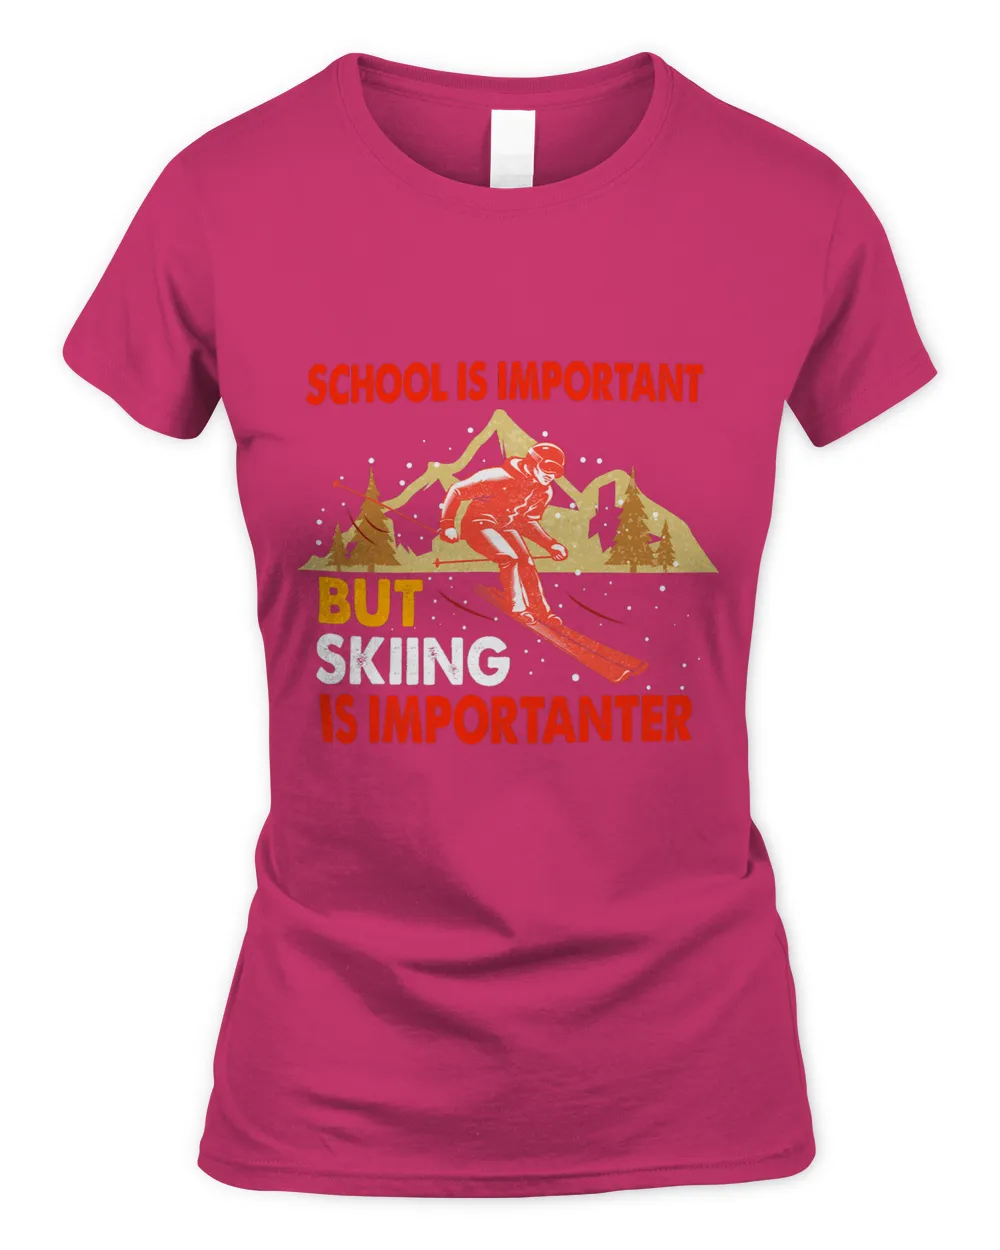 School Is Important But Skiing Is Importanter Funny Ski 1